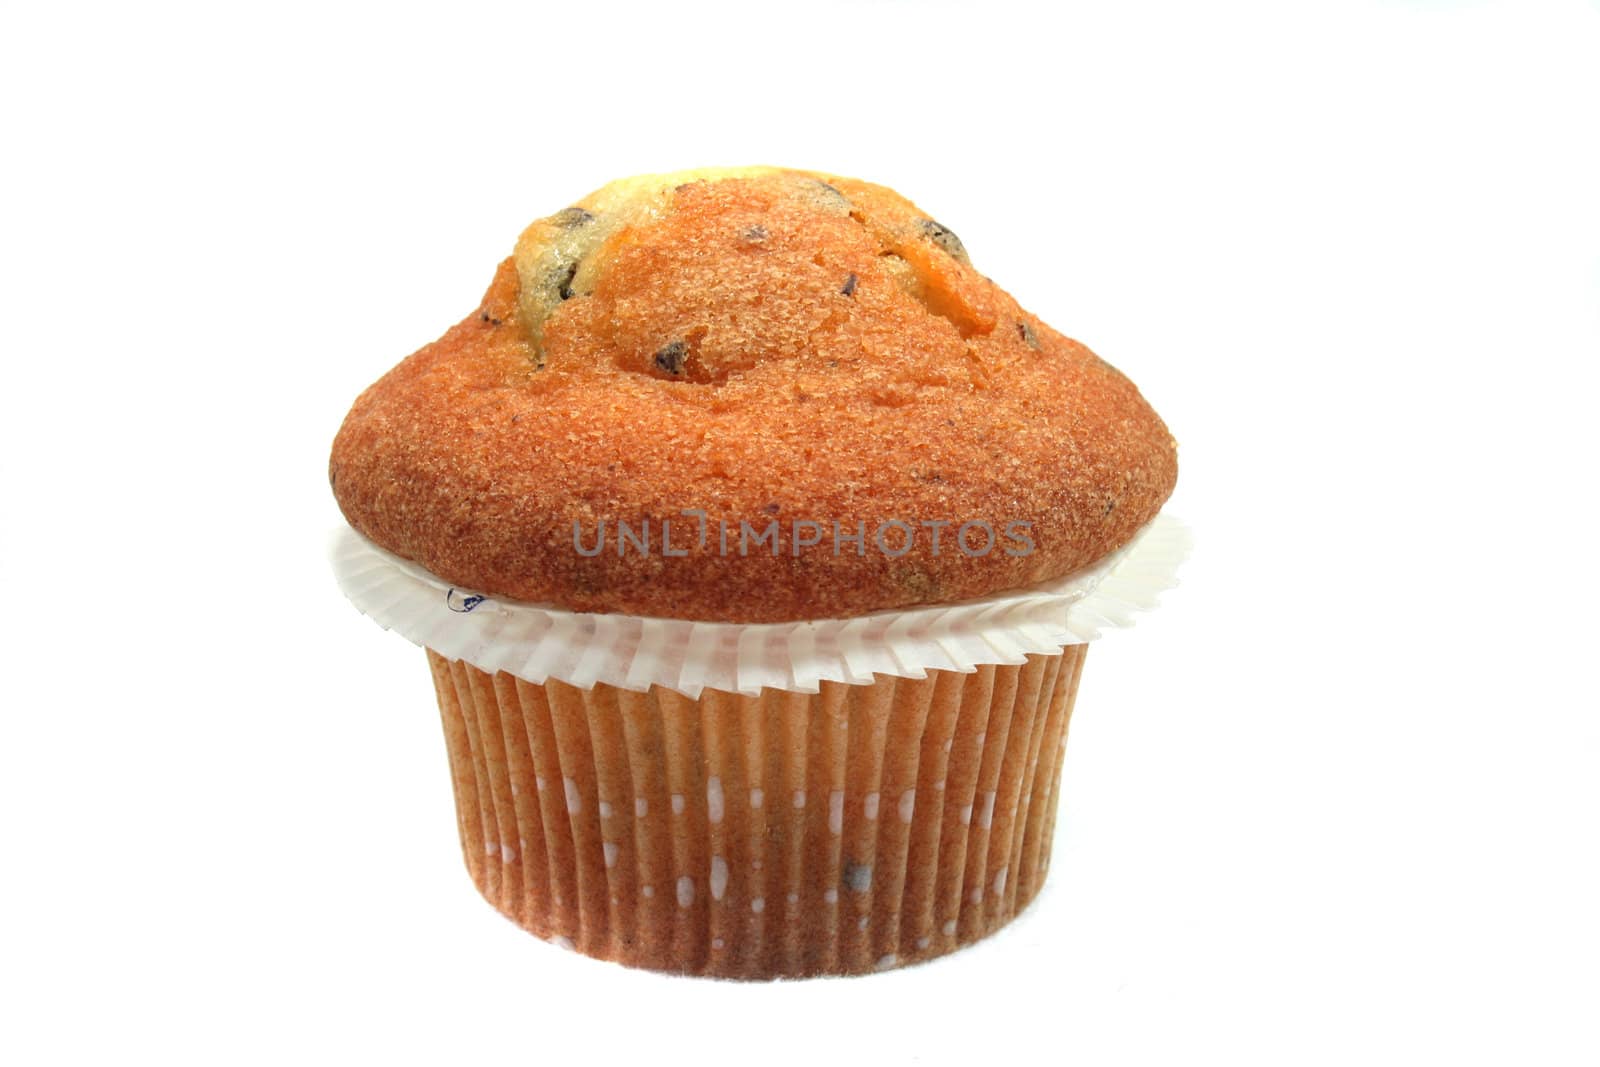 Muffin on a white background